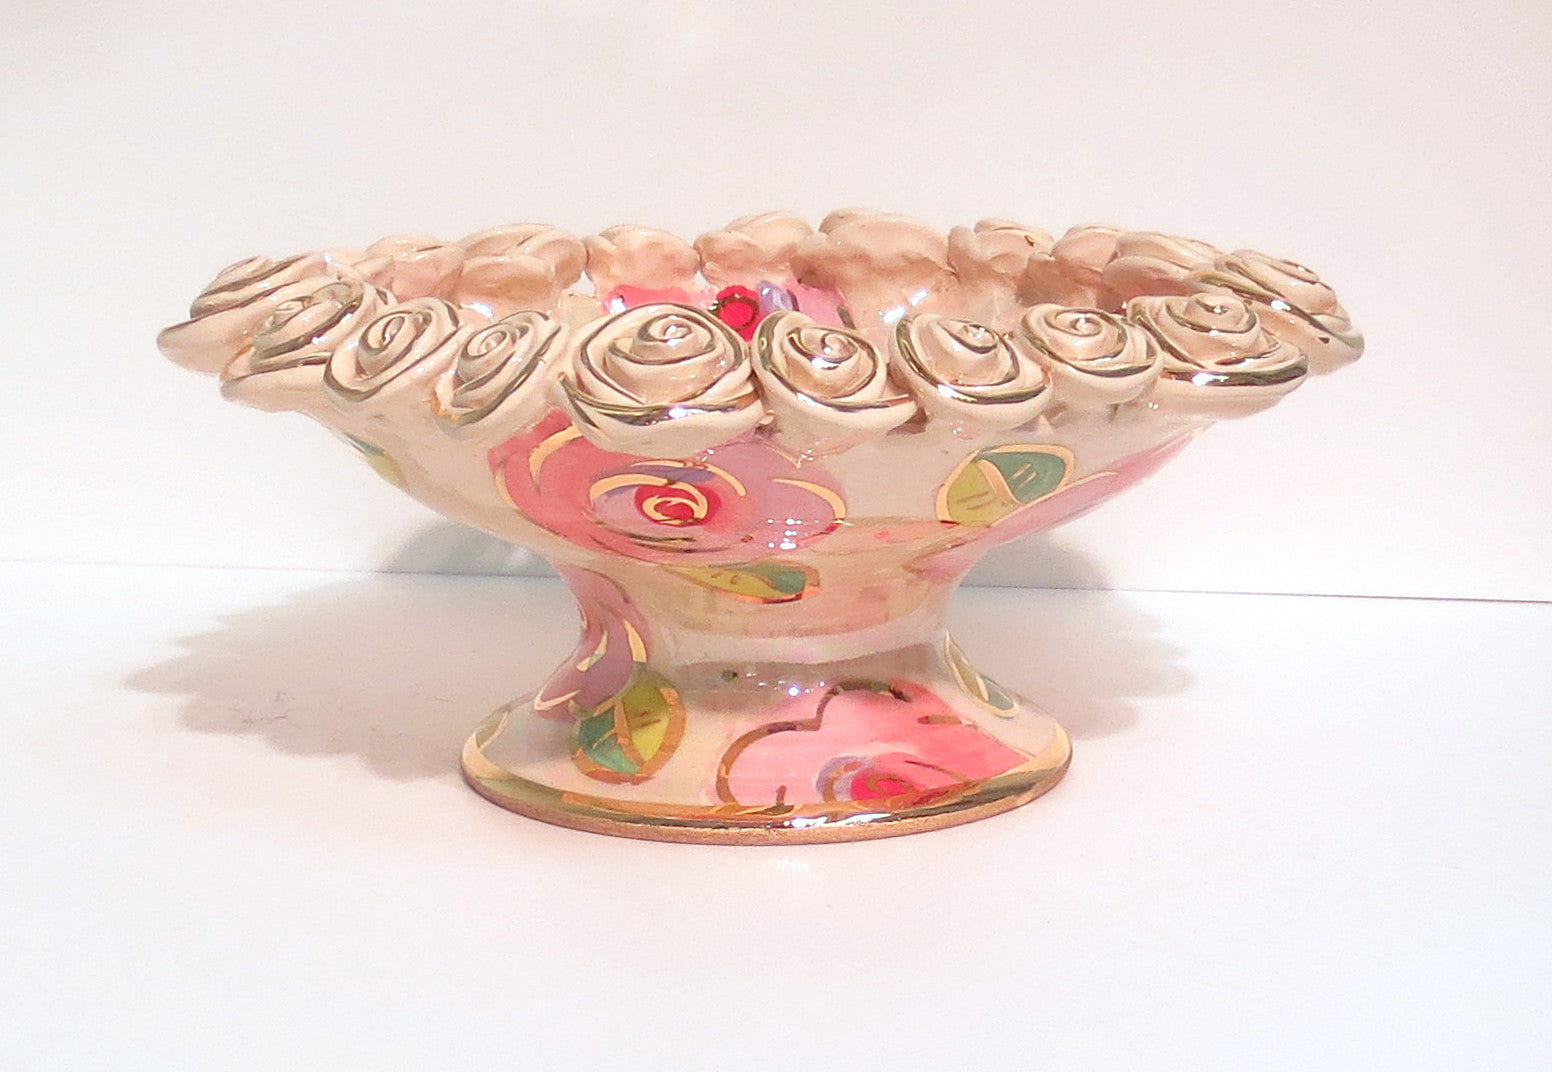 Rose Encrusted Cakestand Pale Pink Roses - MaryRoseYoung